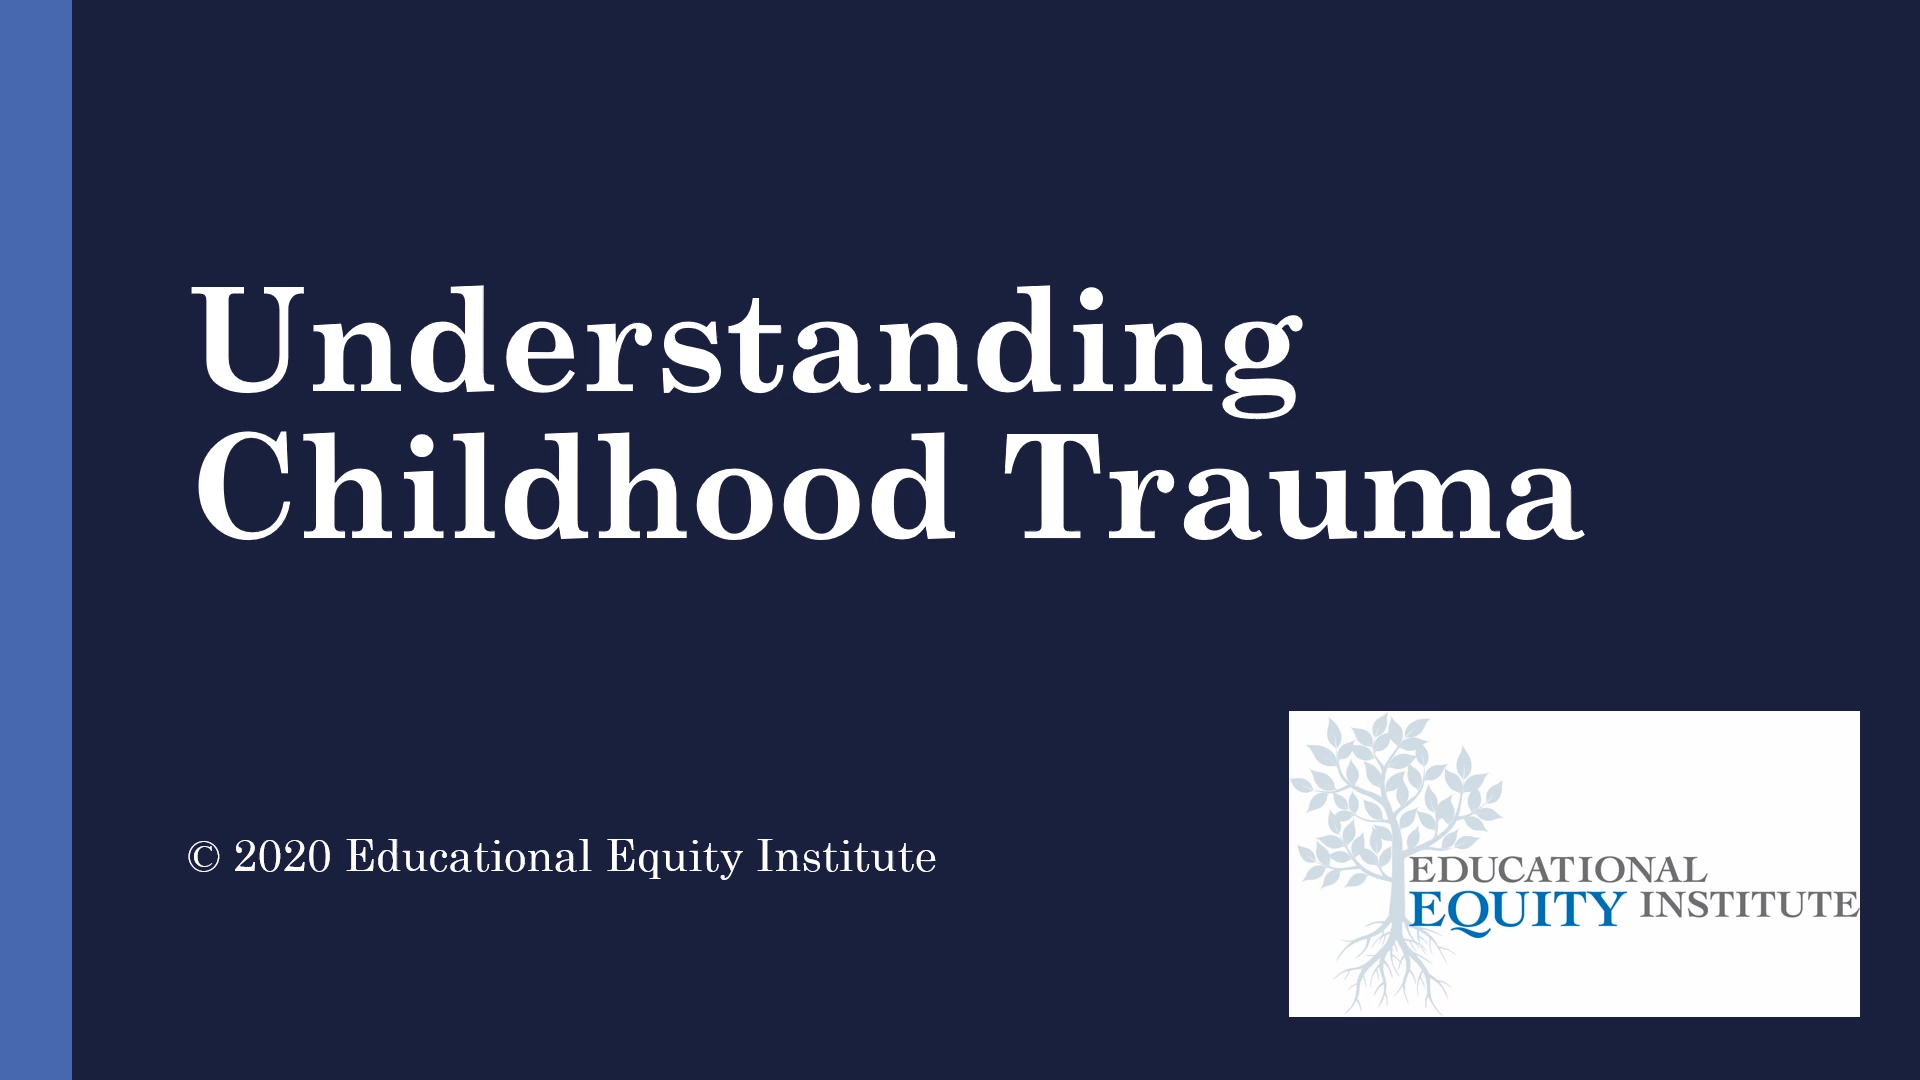 In this module, you will learn about the different types of trauma the children can experience and how to support children and families as they heal.